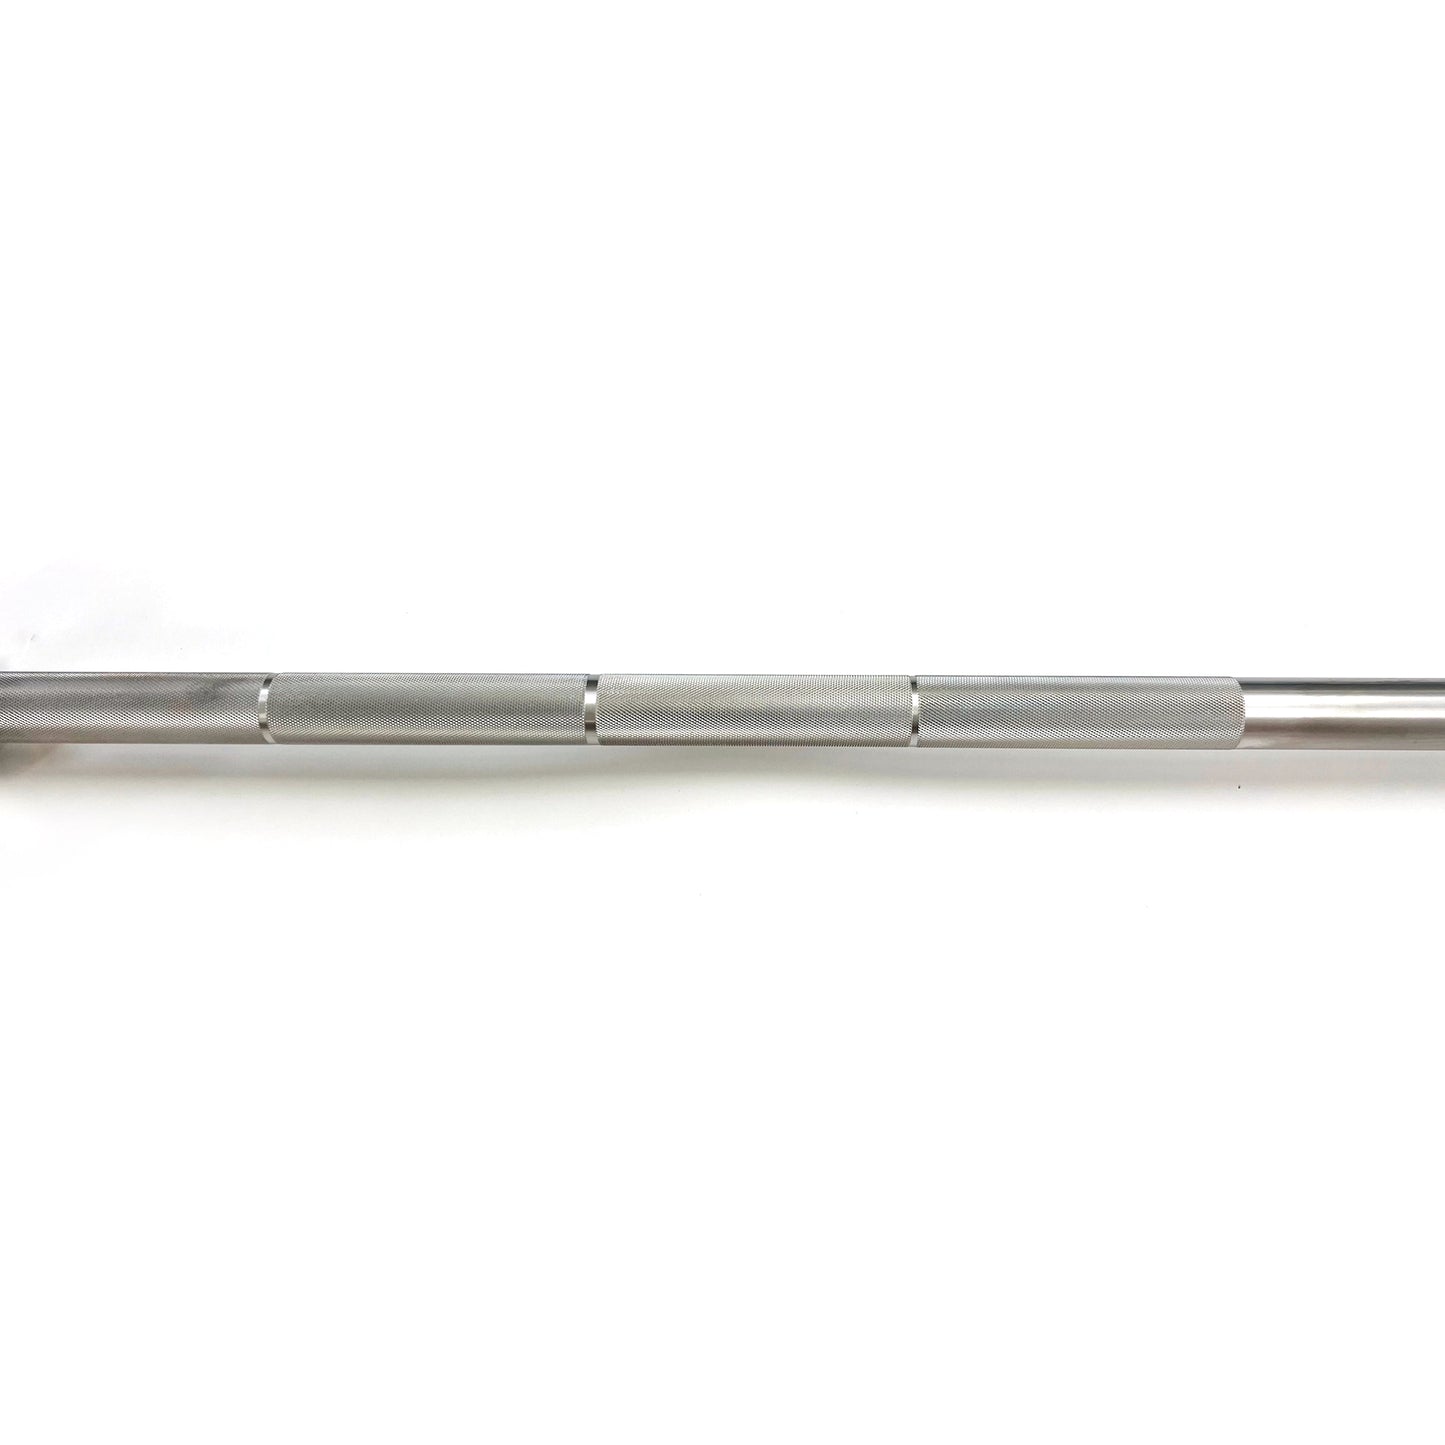 OBS-20KG - 28mm Stainless Olympic Bar (USA)